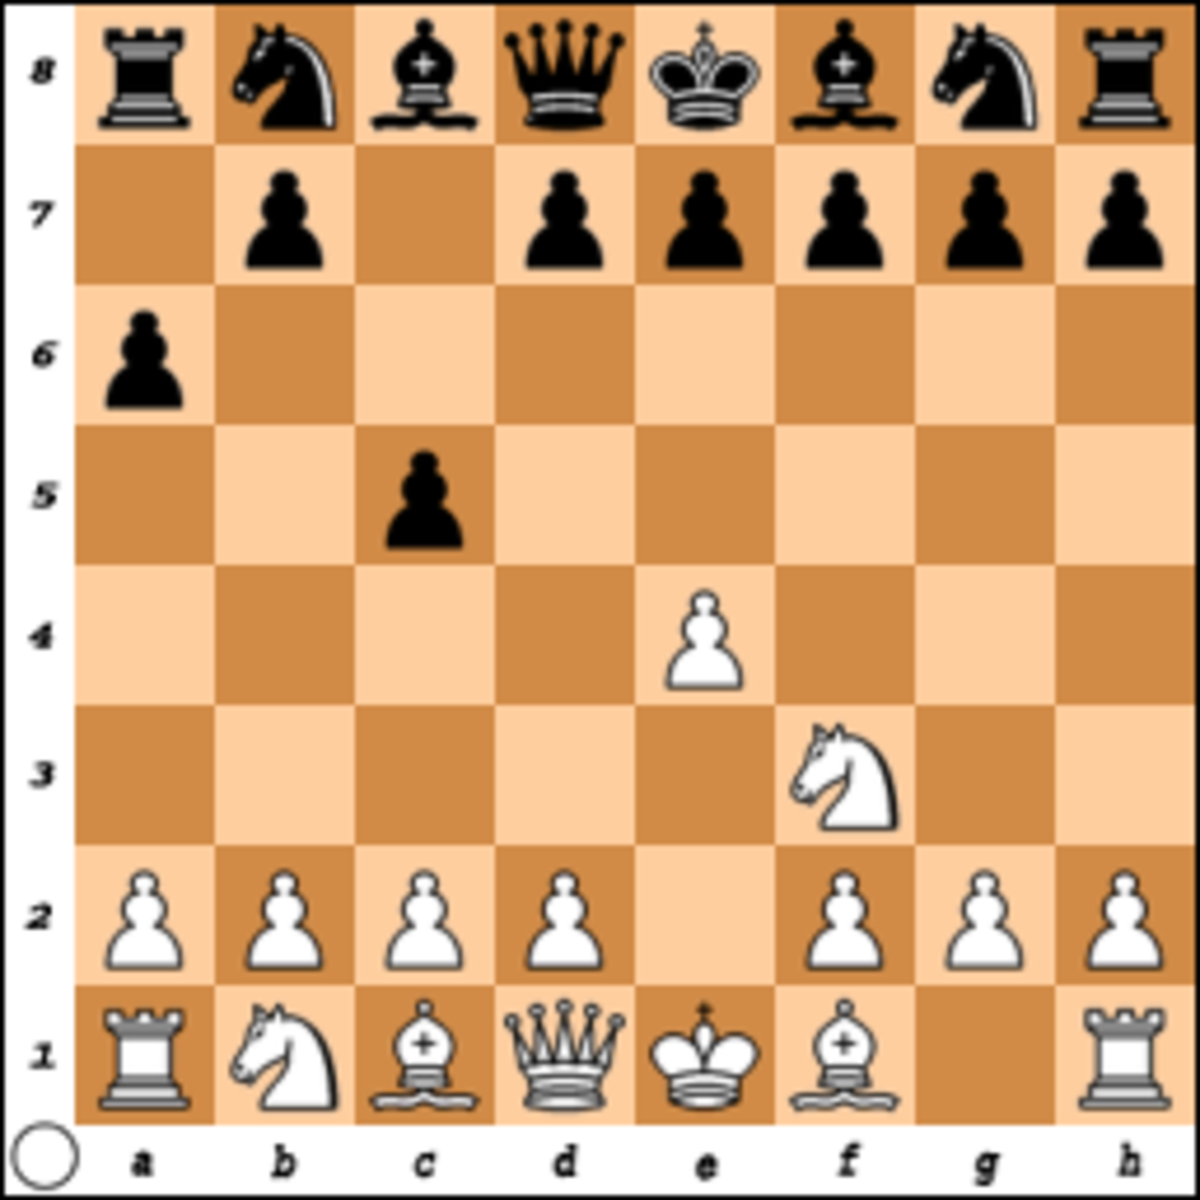 Chess Strategy: Understanding How to Play With a Backward Pawn